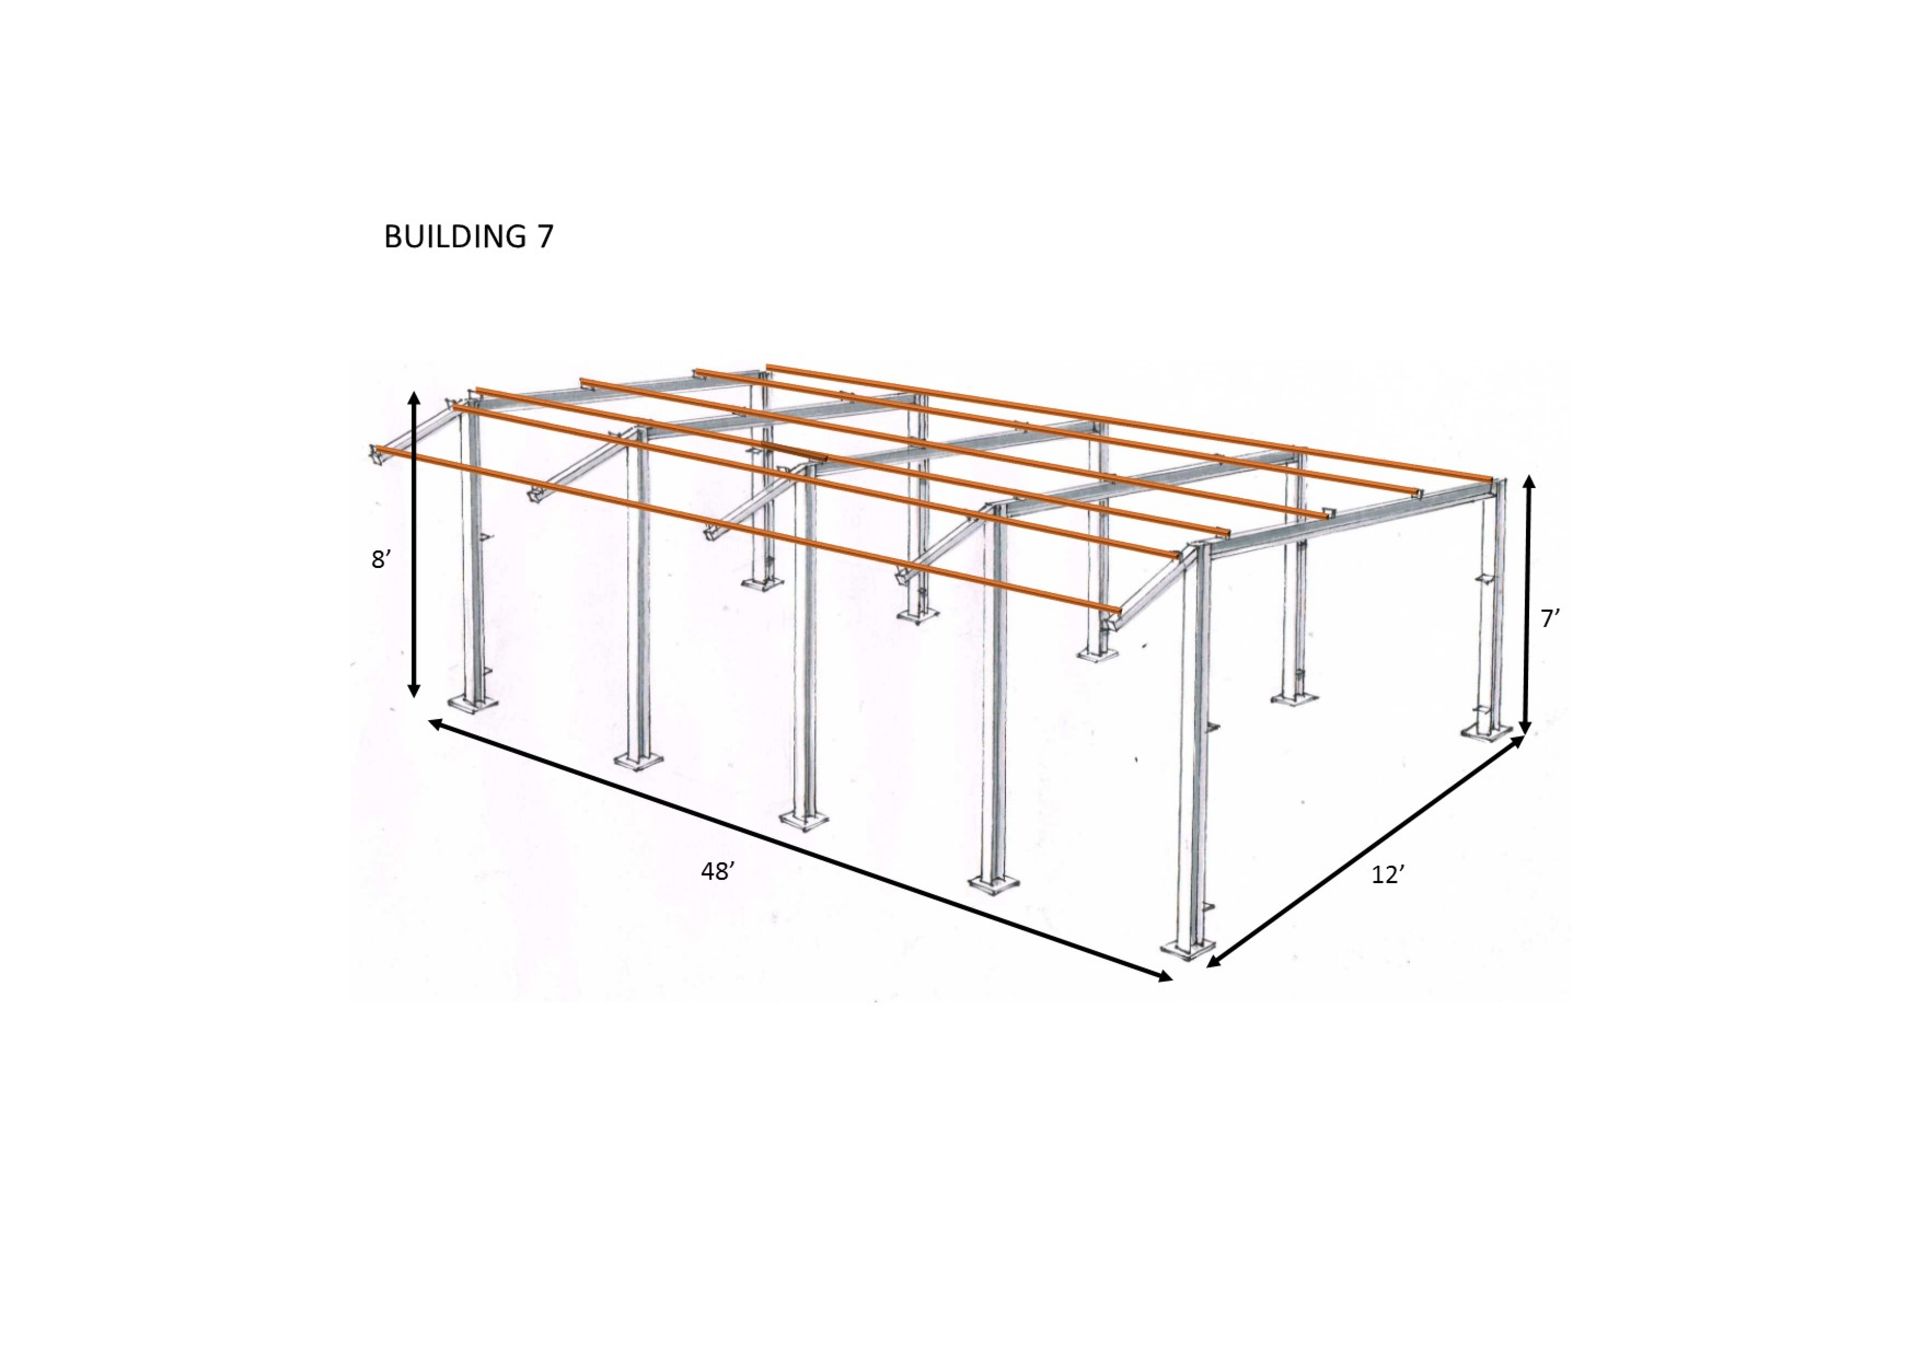 Mono Slope, Steel Framework, Stable/Shelter with Purlins and Fixings 48ft long x 12ft wide - Image 6 of 7